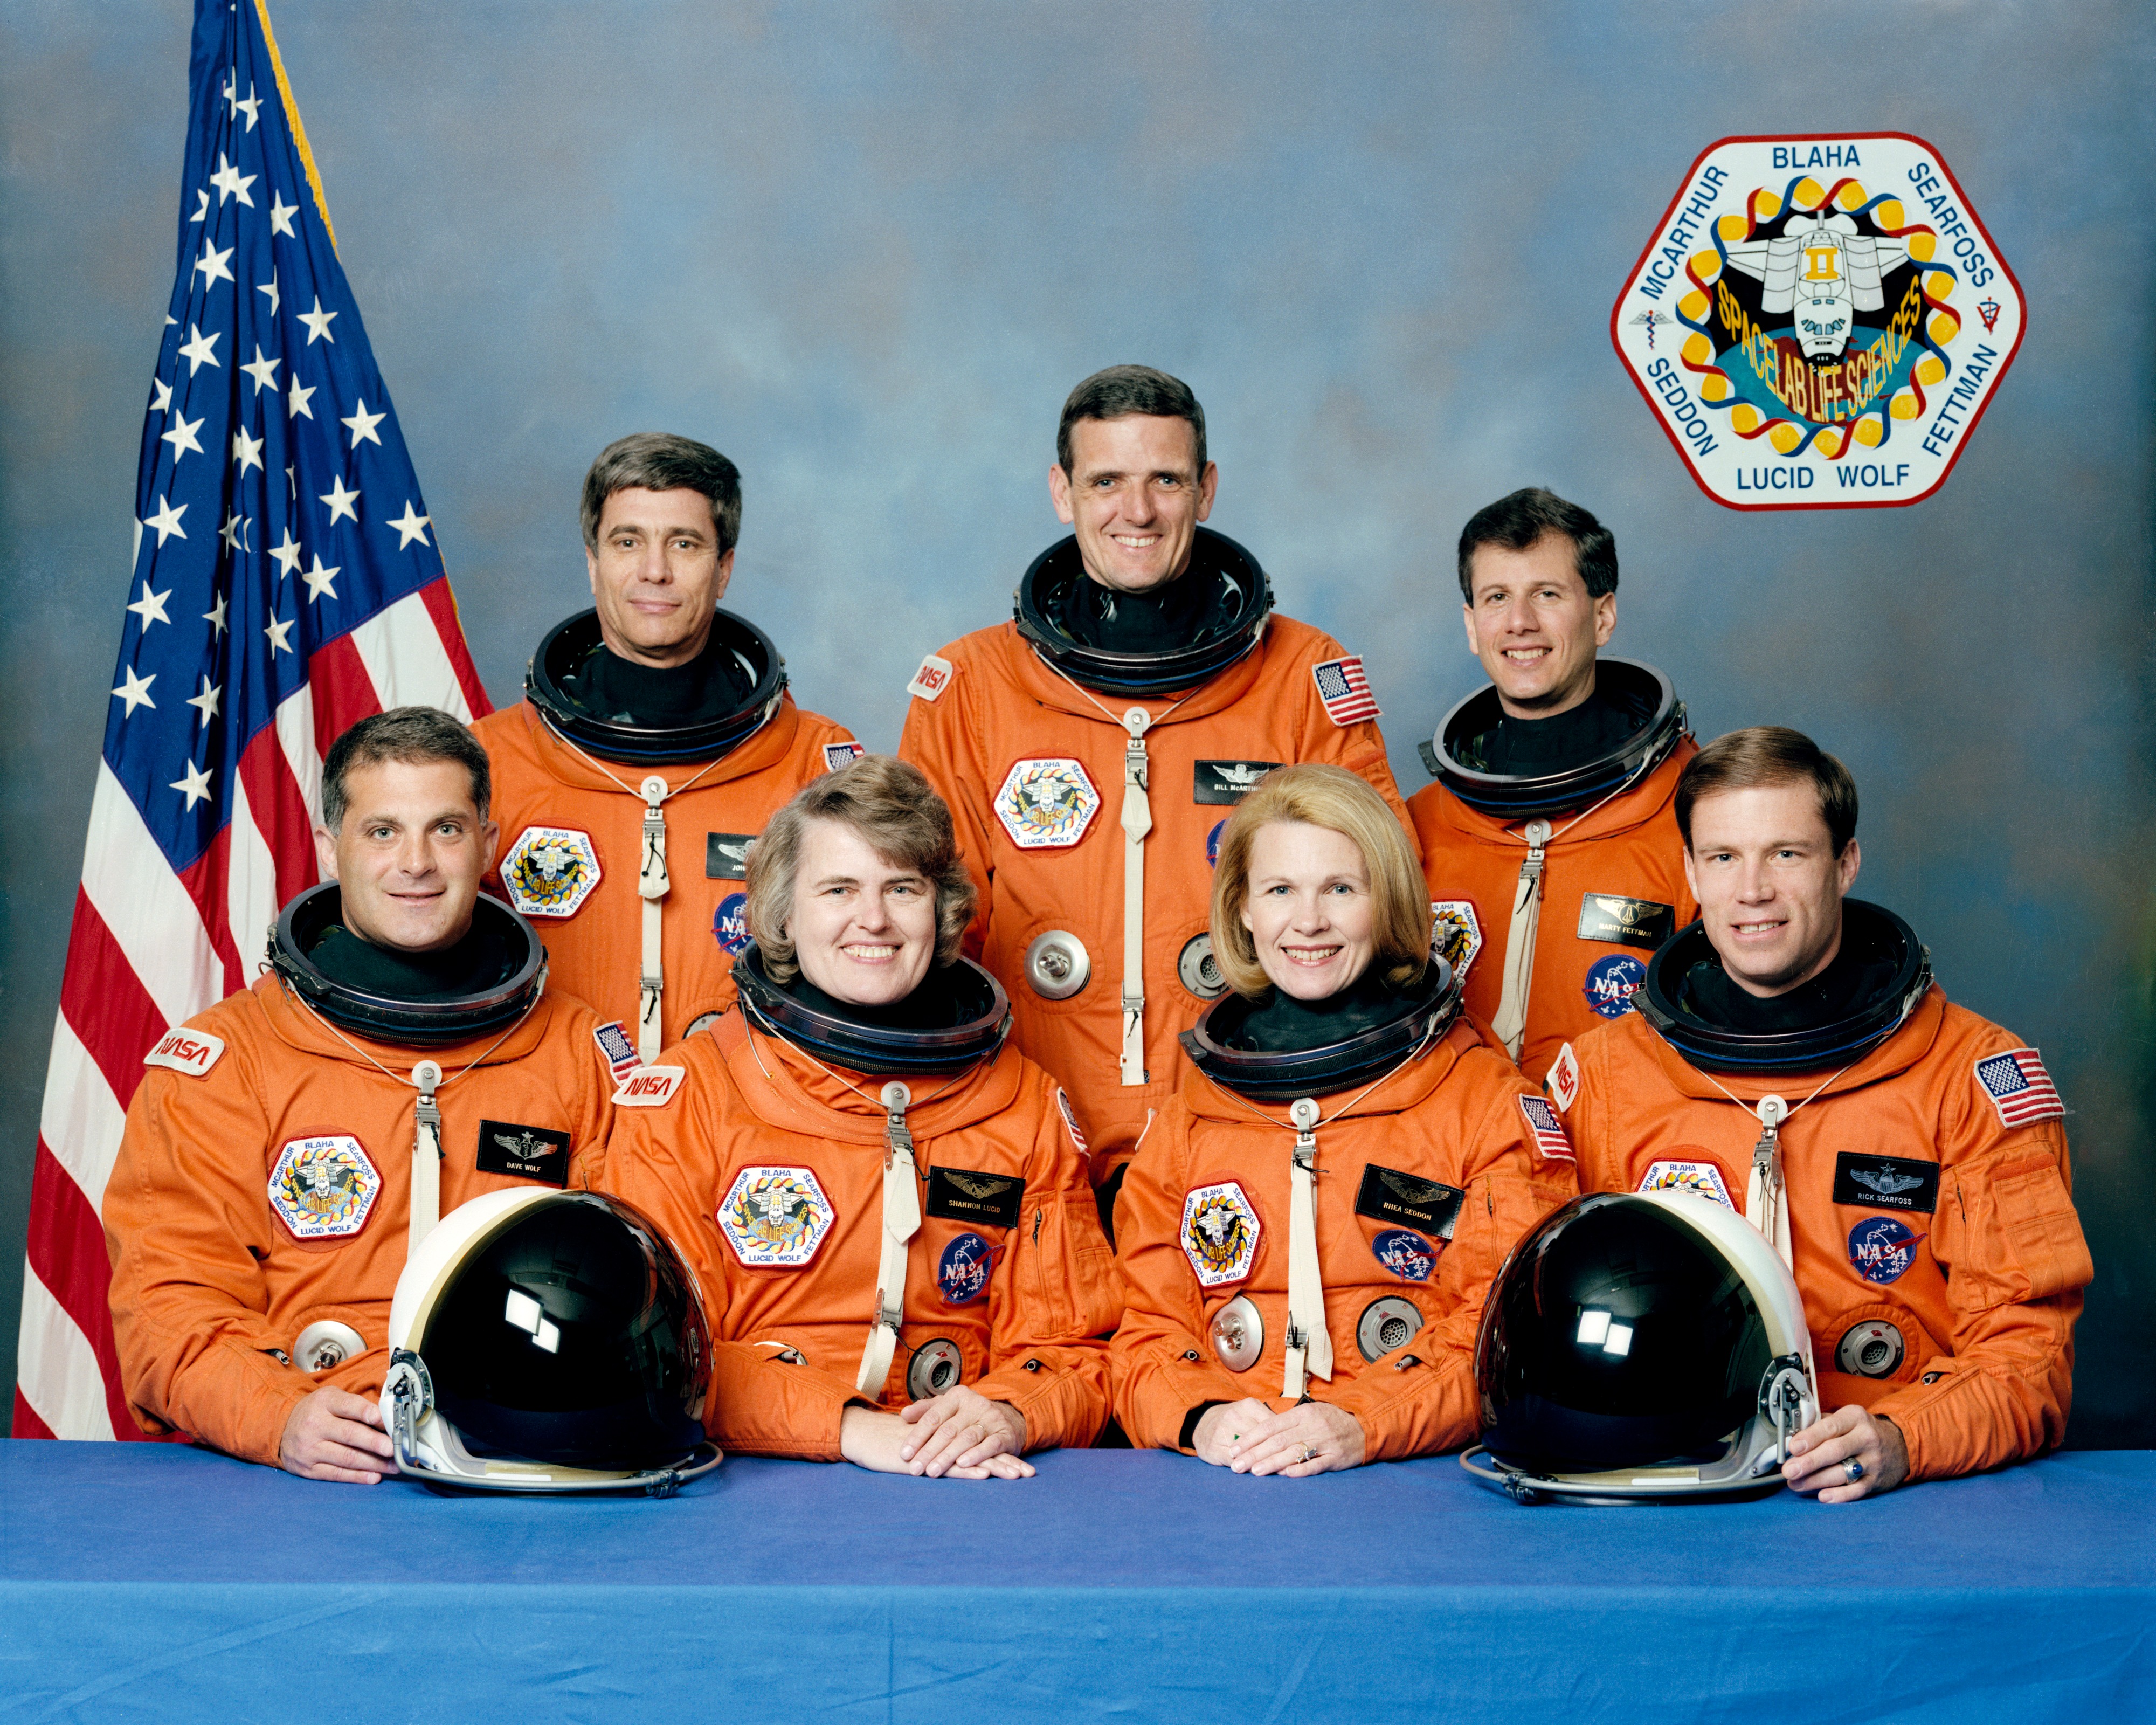 30 Years Ago: The STS-58 Spacelab Life Sciences-2 Mission – NASA